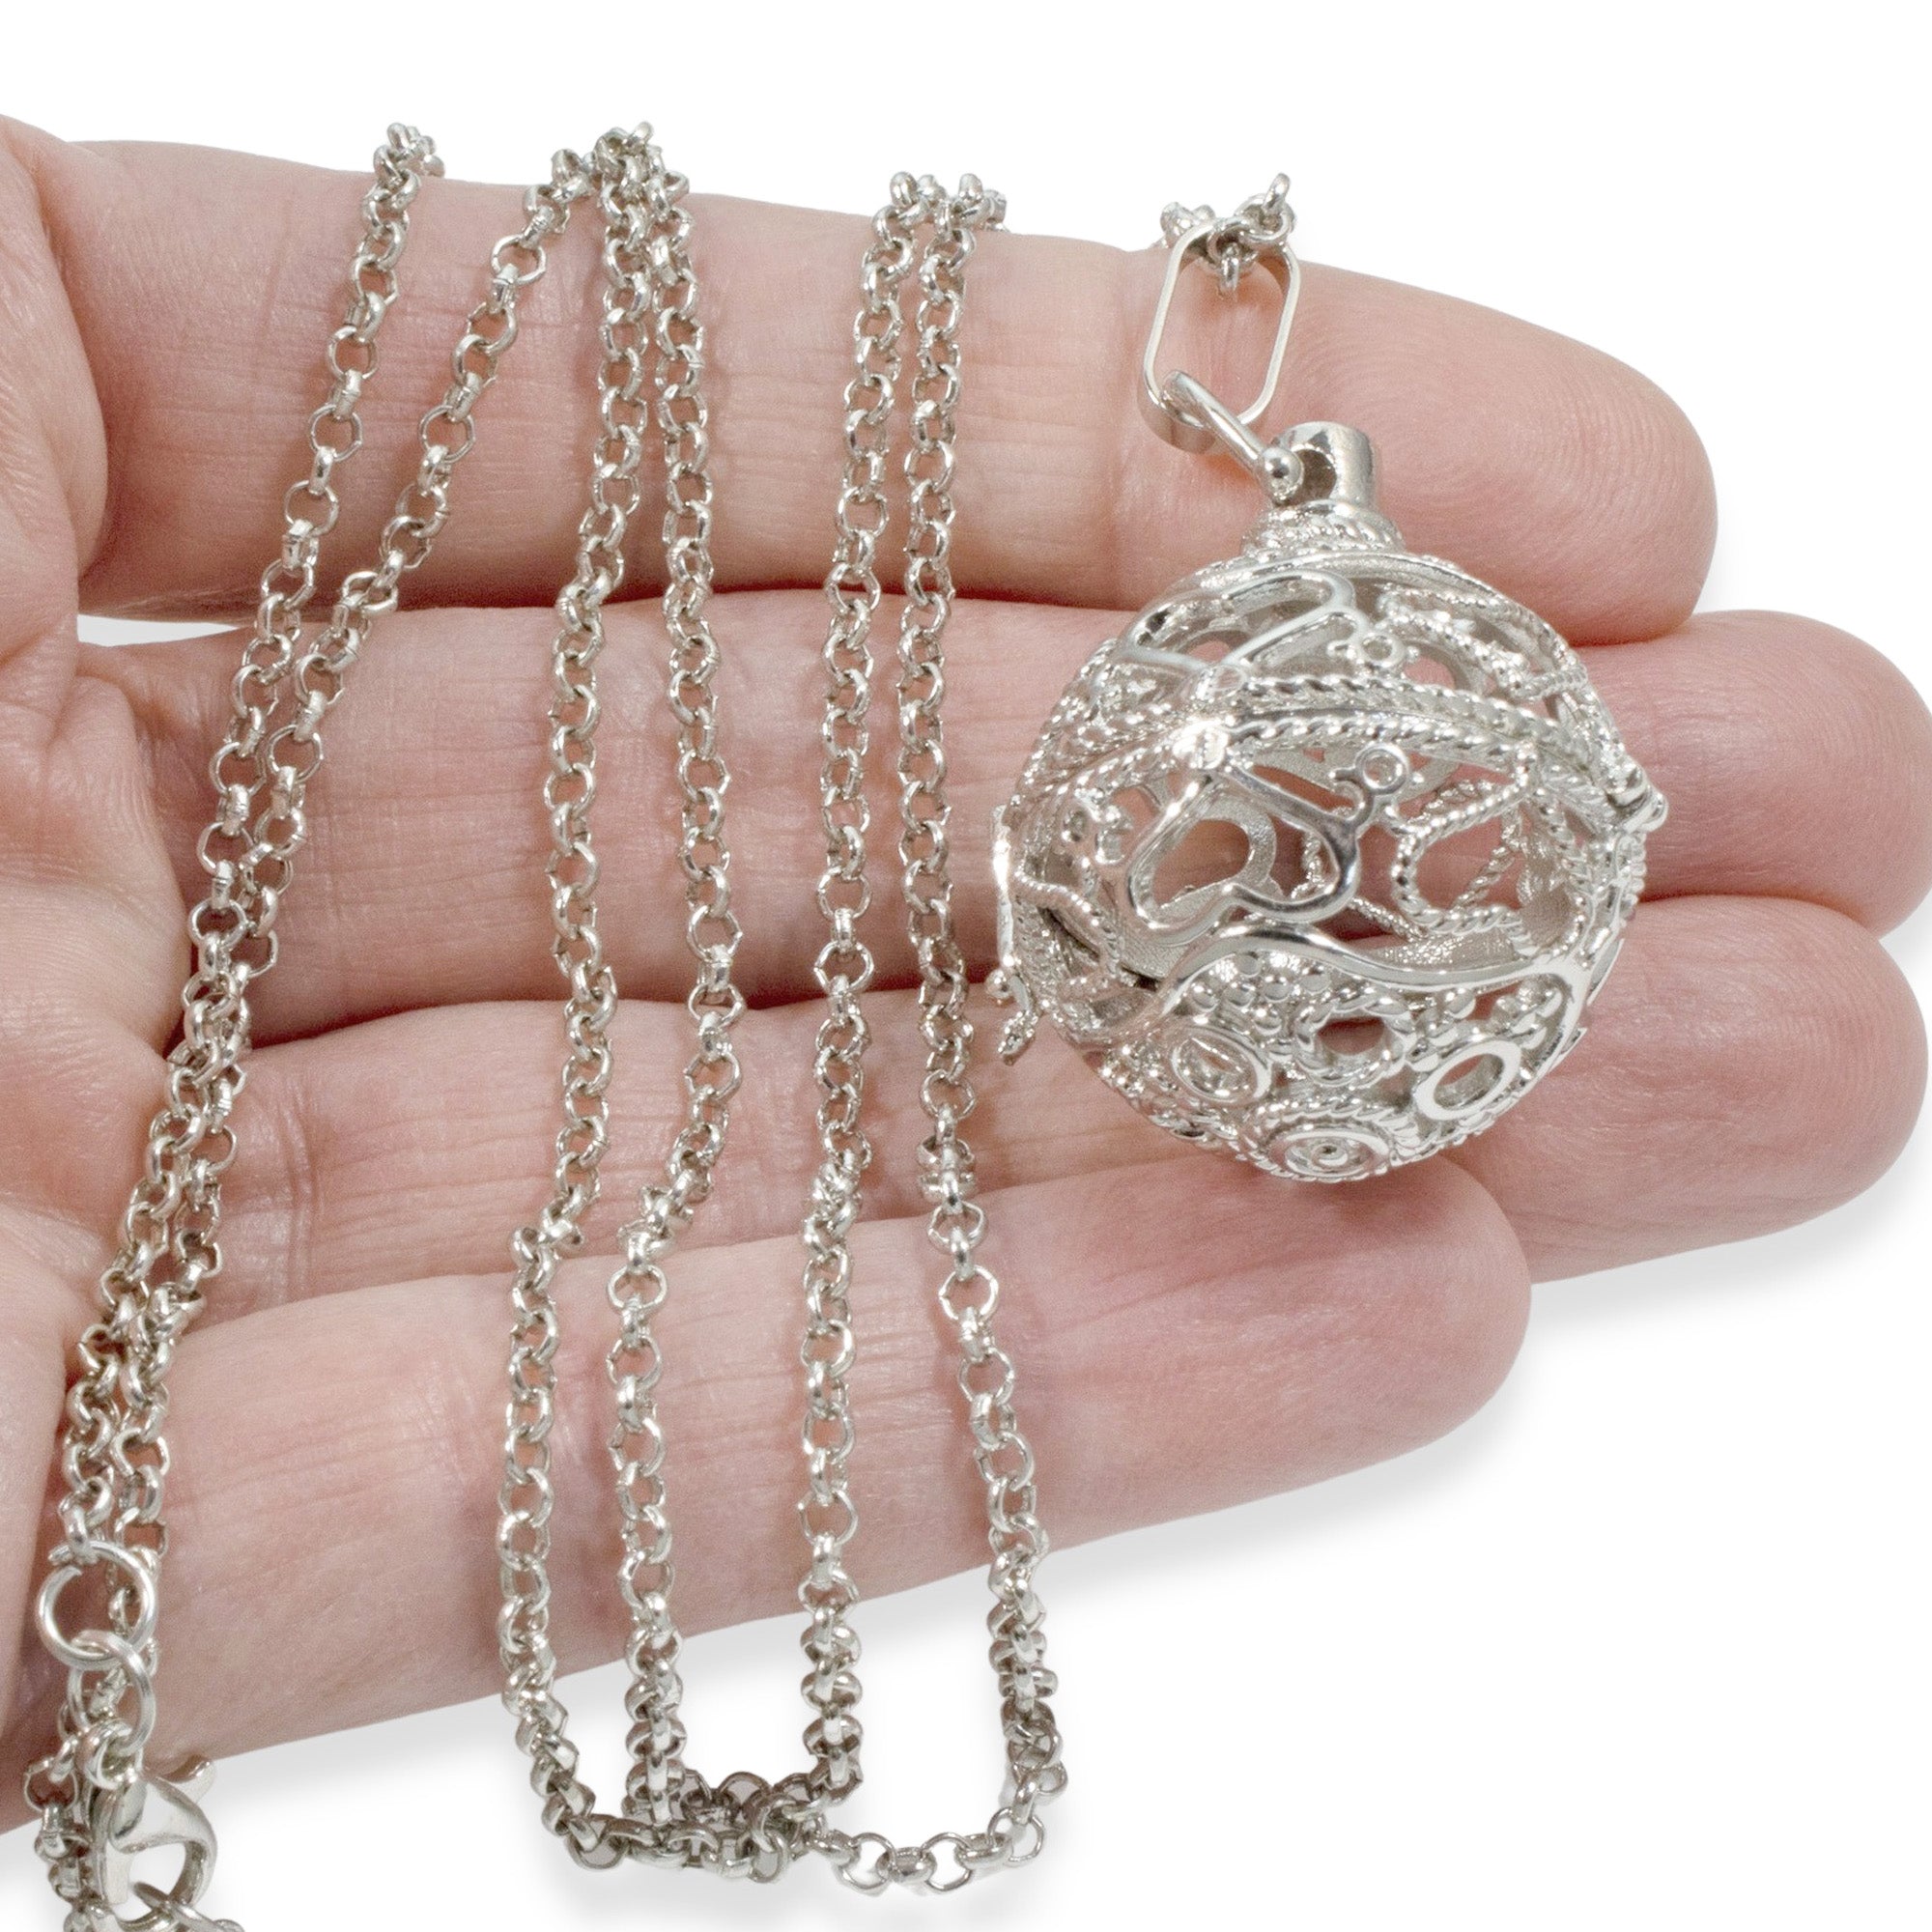 Sunflower Locket Necklace 925 Silver That Holds Pictures Memory Locket –  STYLE HUB 365